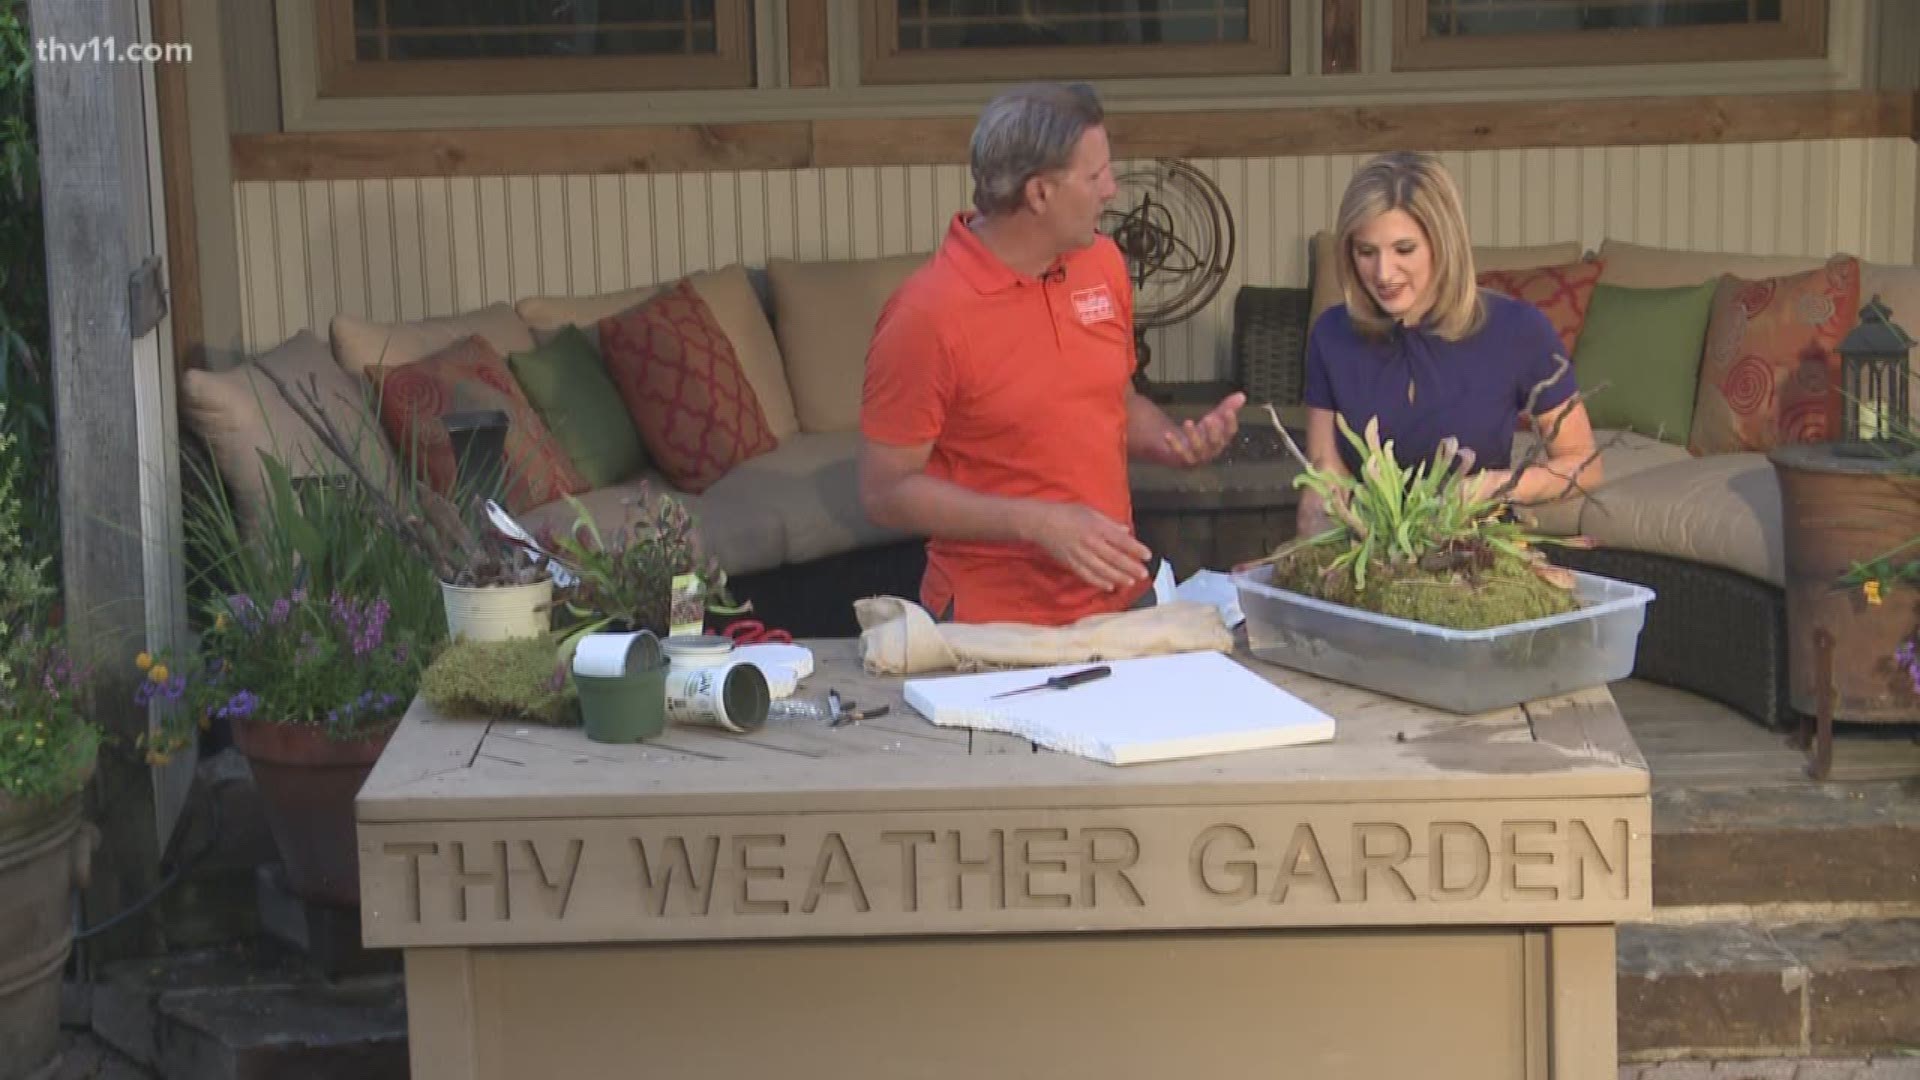 Chris H. Olsen shows us how to make a floating garden for your pond or fountain.